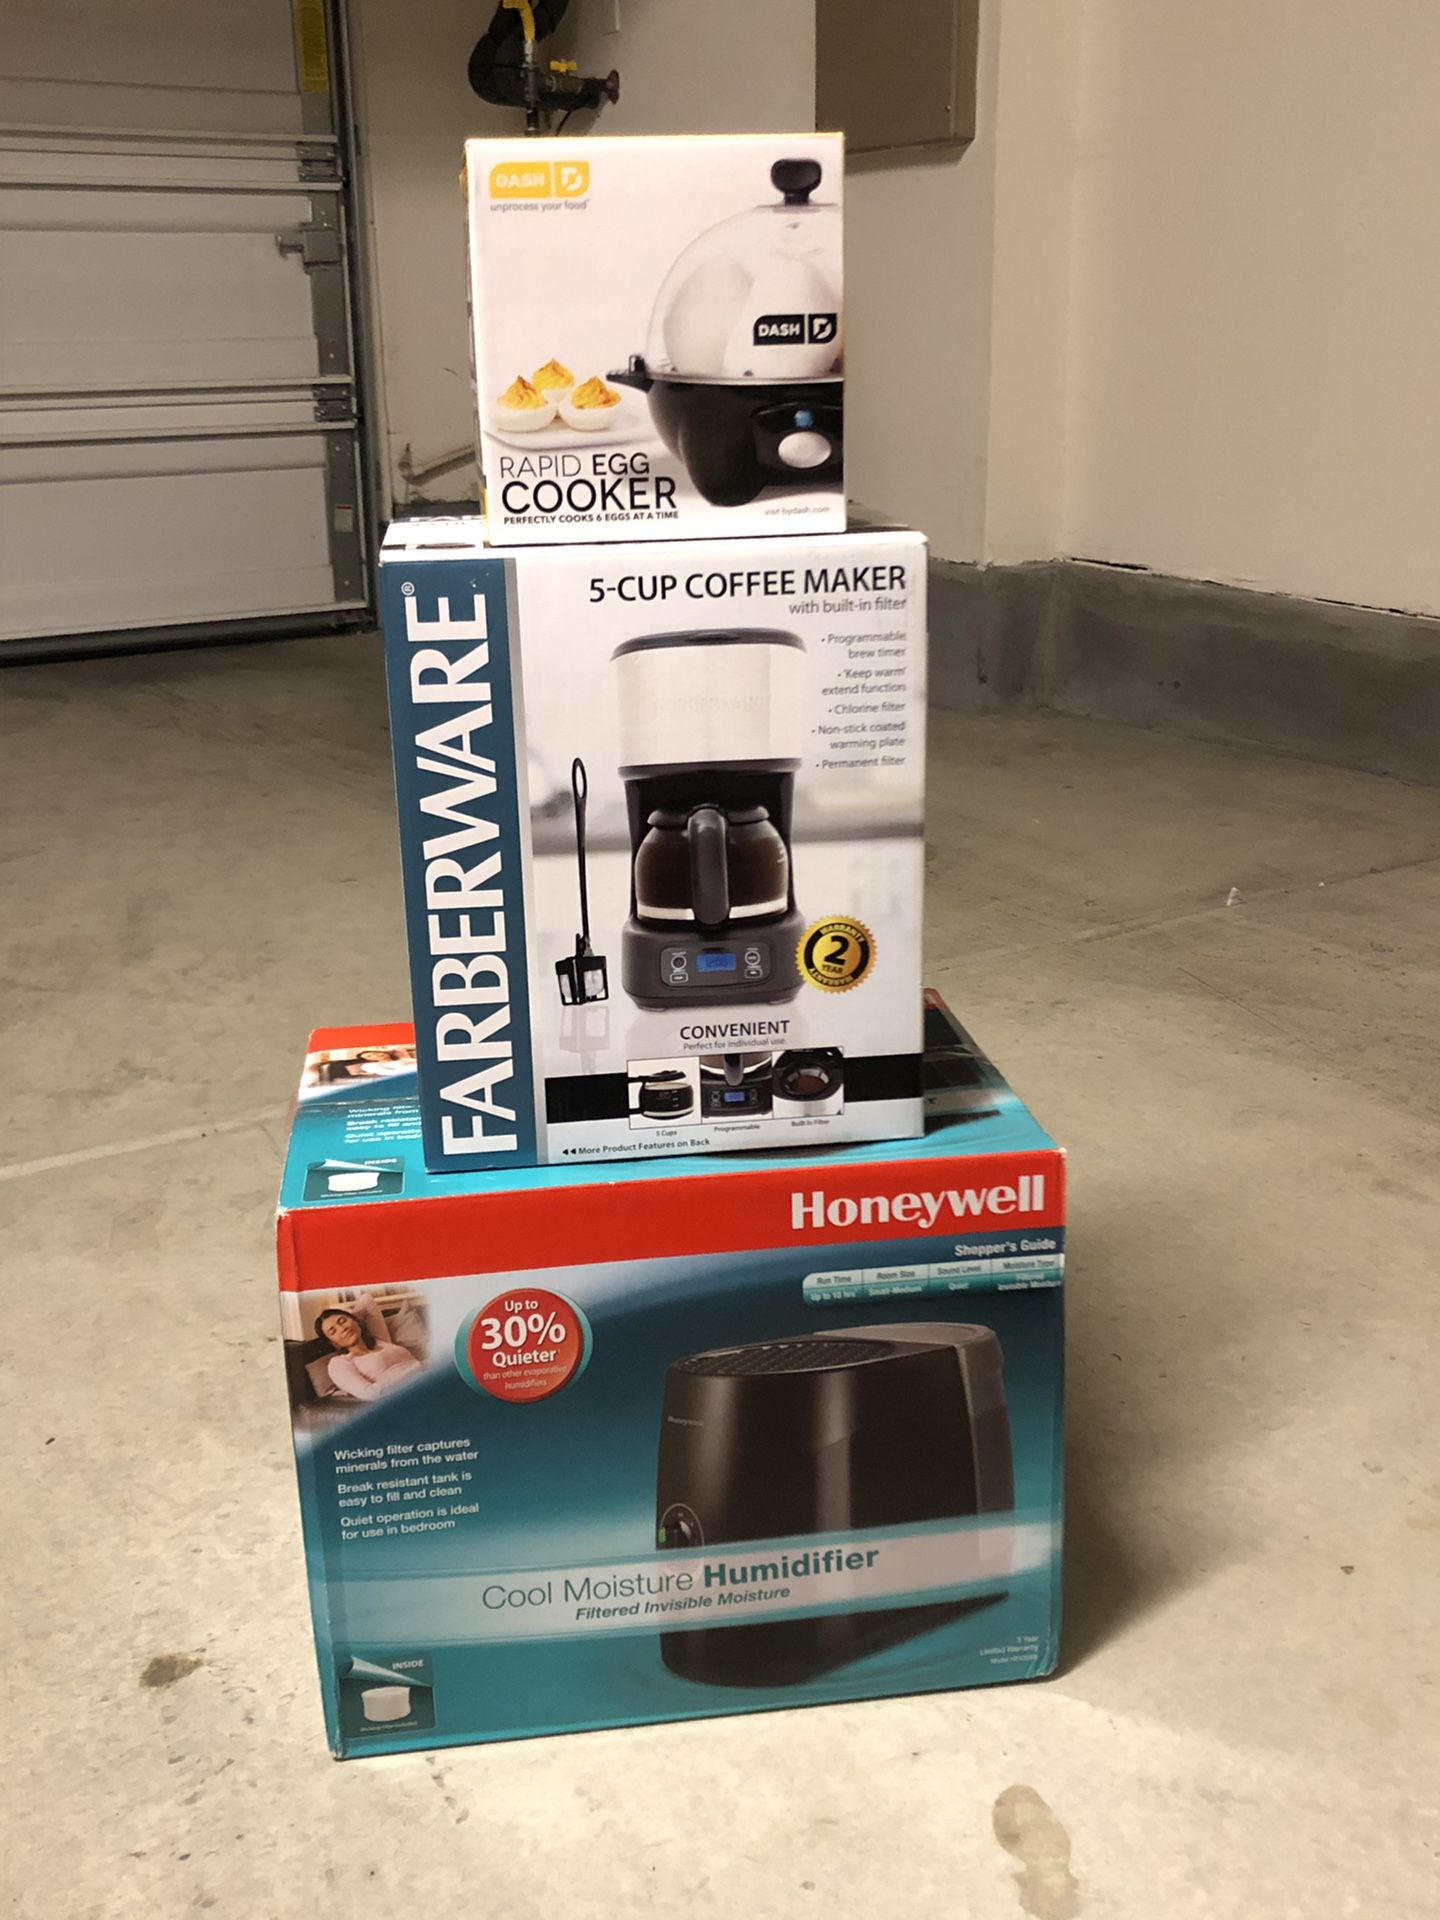 Small Kitchen, Rapid Egg Cooker, Coffee Maker, Humidifier